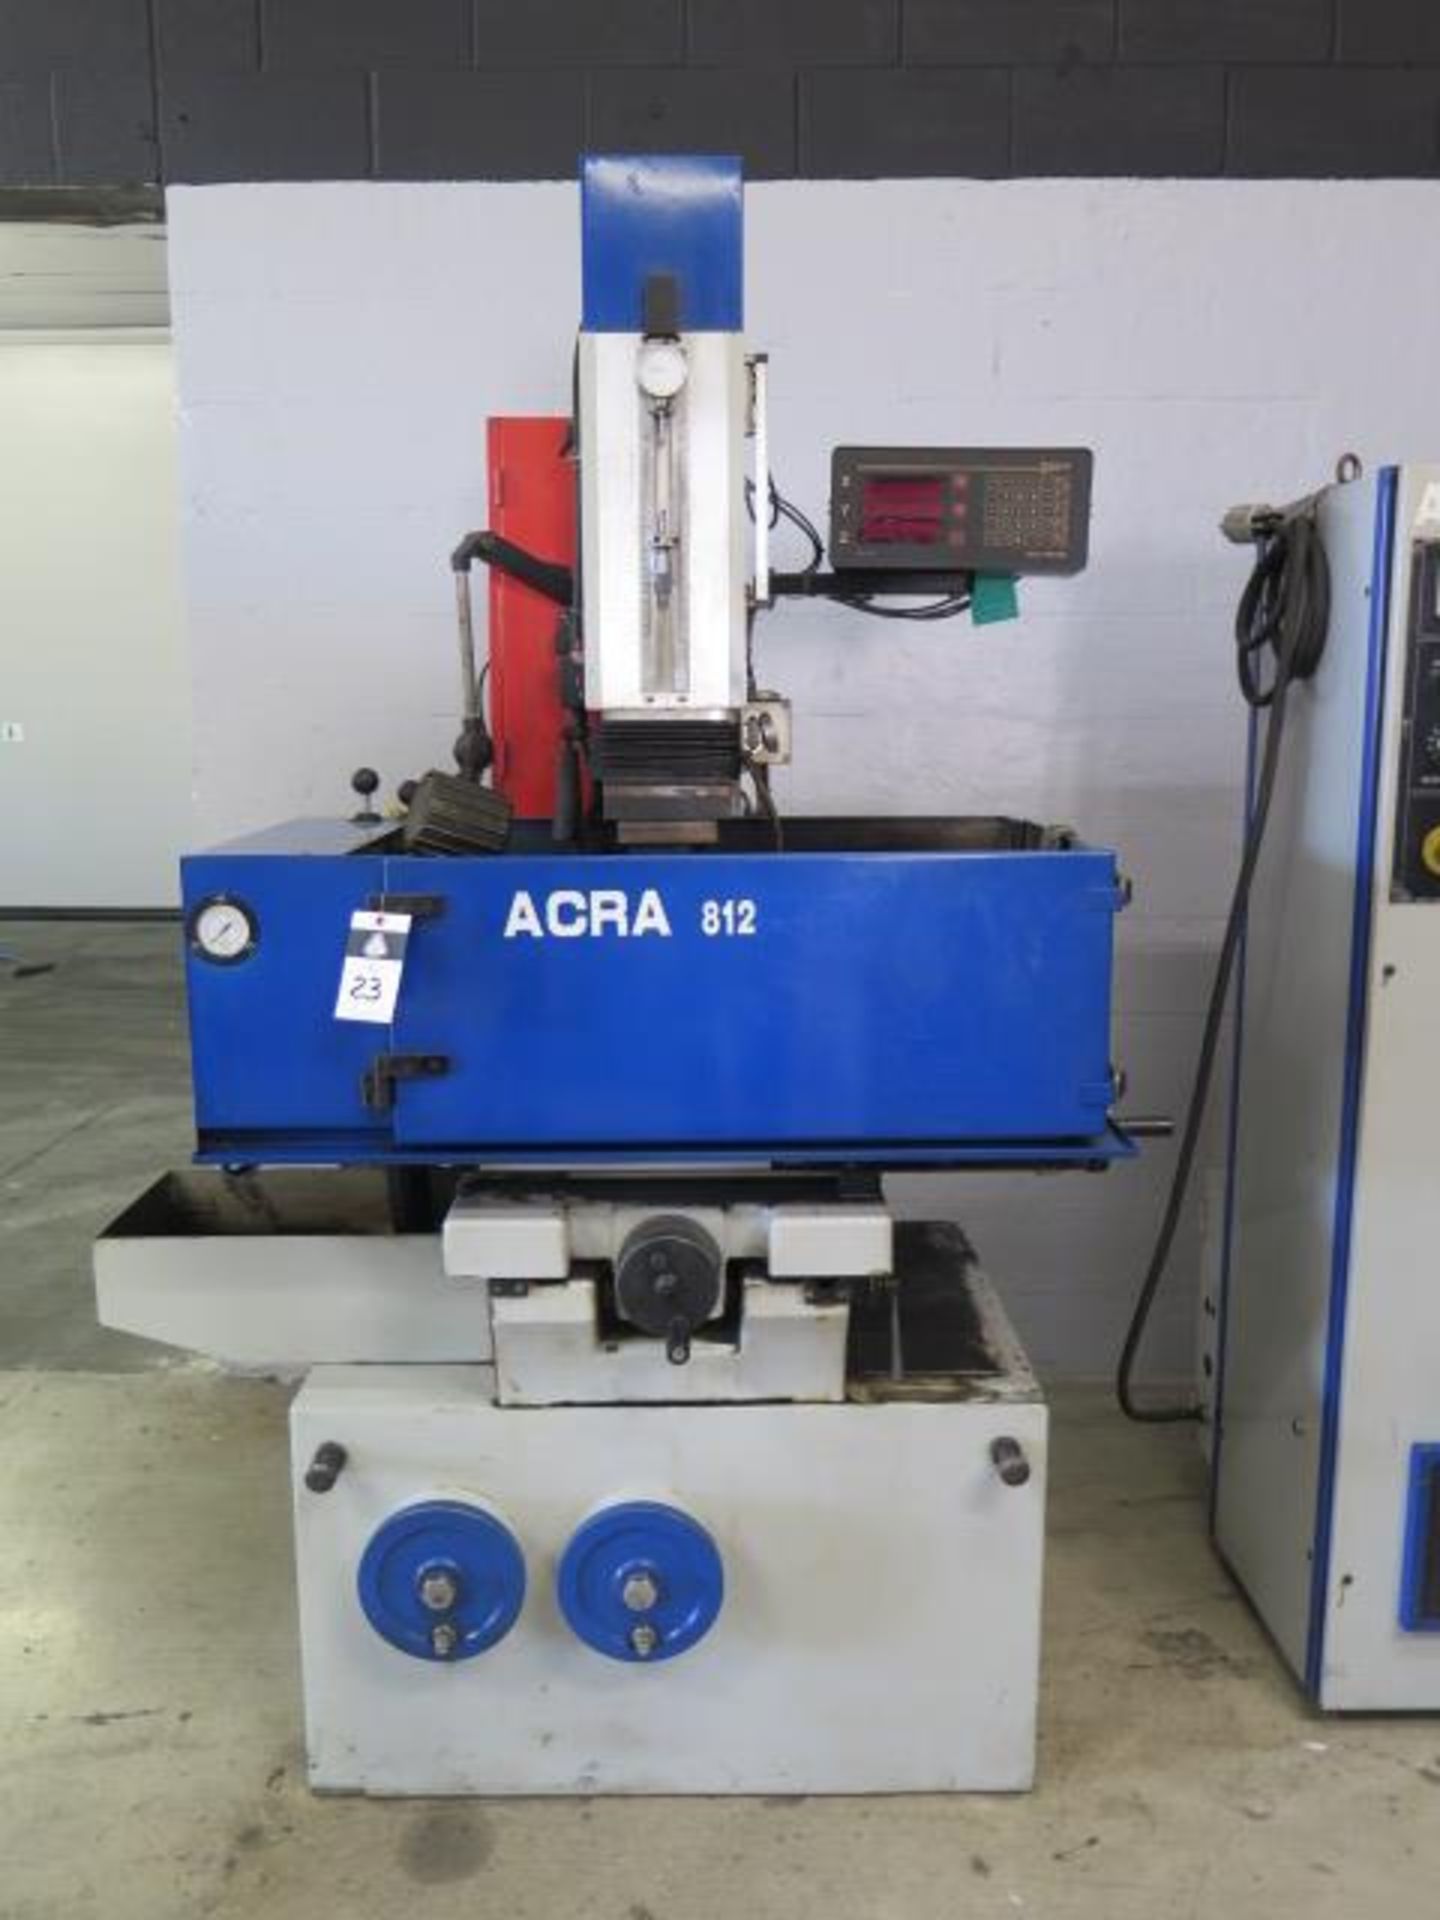 1997 Acra 812 mdl. M812/30A Die Sinker EDM Machine s/n ACRA1204M w/ Acra 30A Power Source,SOLD AS IS - Image 2 of 25